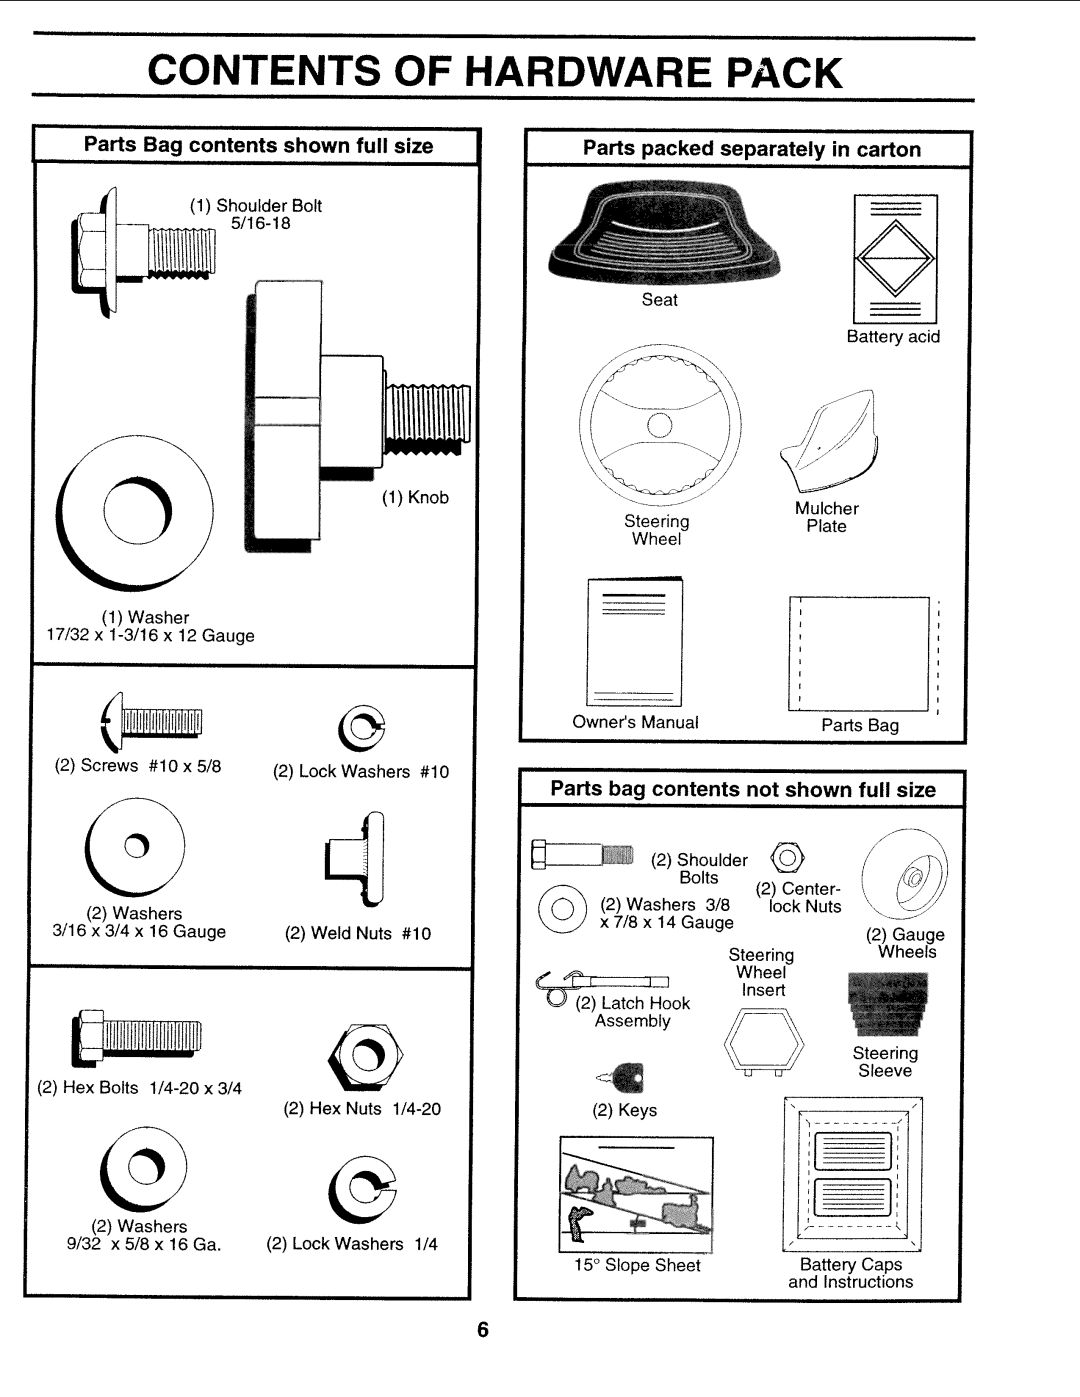 Sears 917.25271 Contents Of, Hardware Pack, Parts Bag contents shown full size, Parts packed separately in carton, Knob 